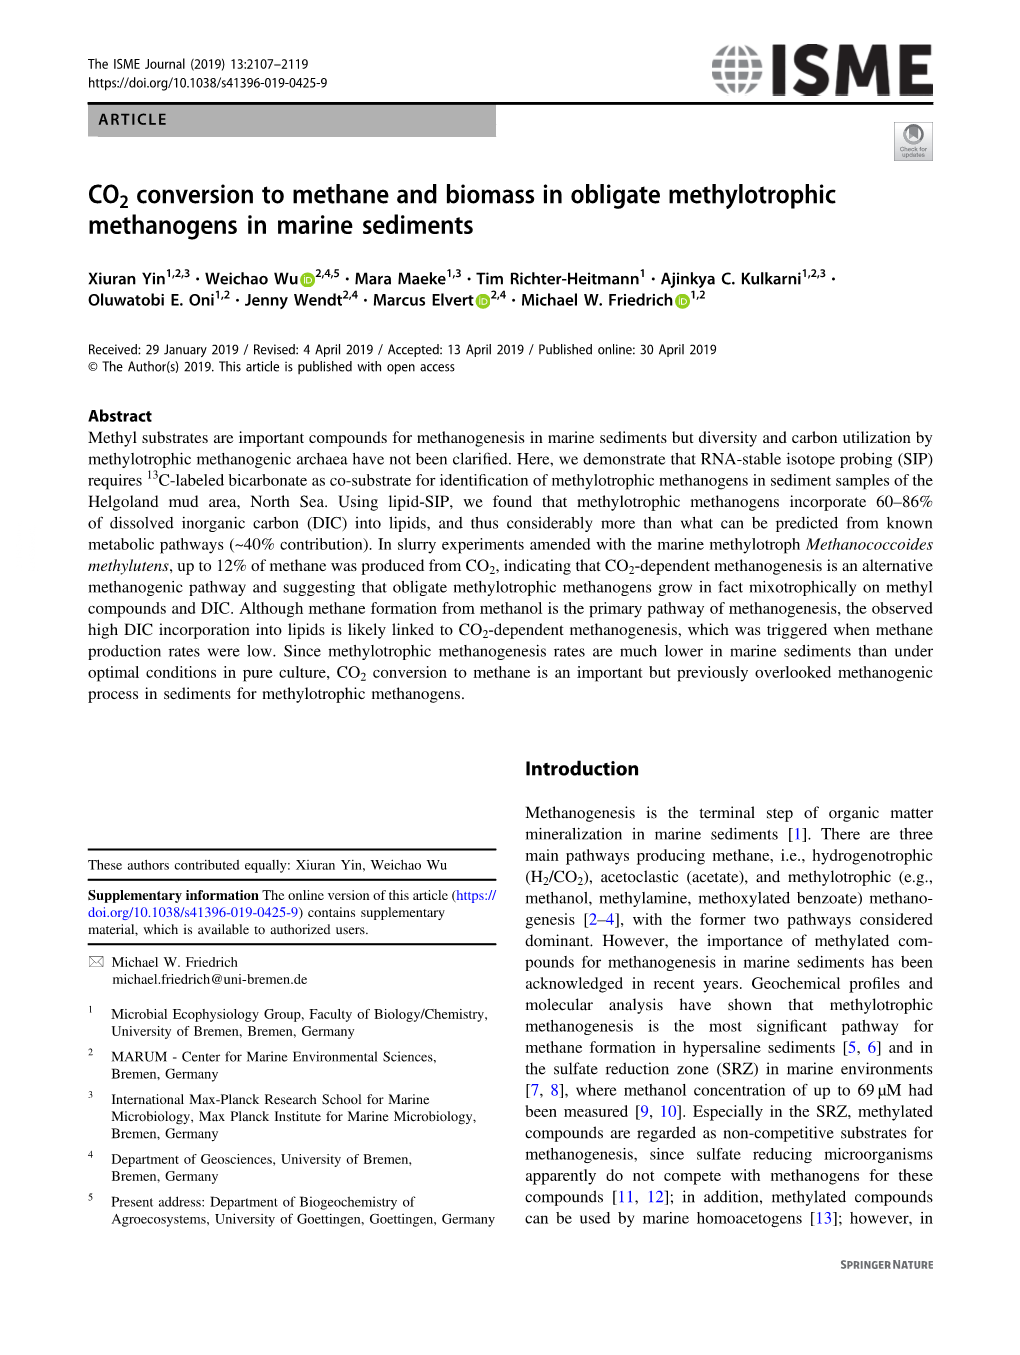 CO2 Conversion to Methane and Biomass in Obligate Methylotrophic Methanogens in Marine Sediments